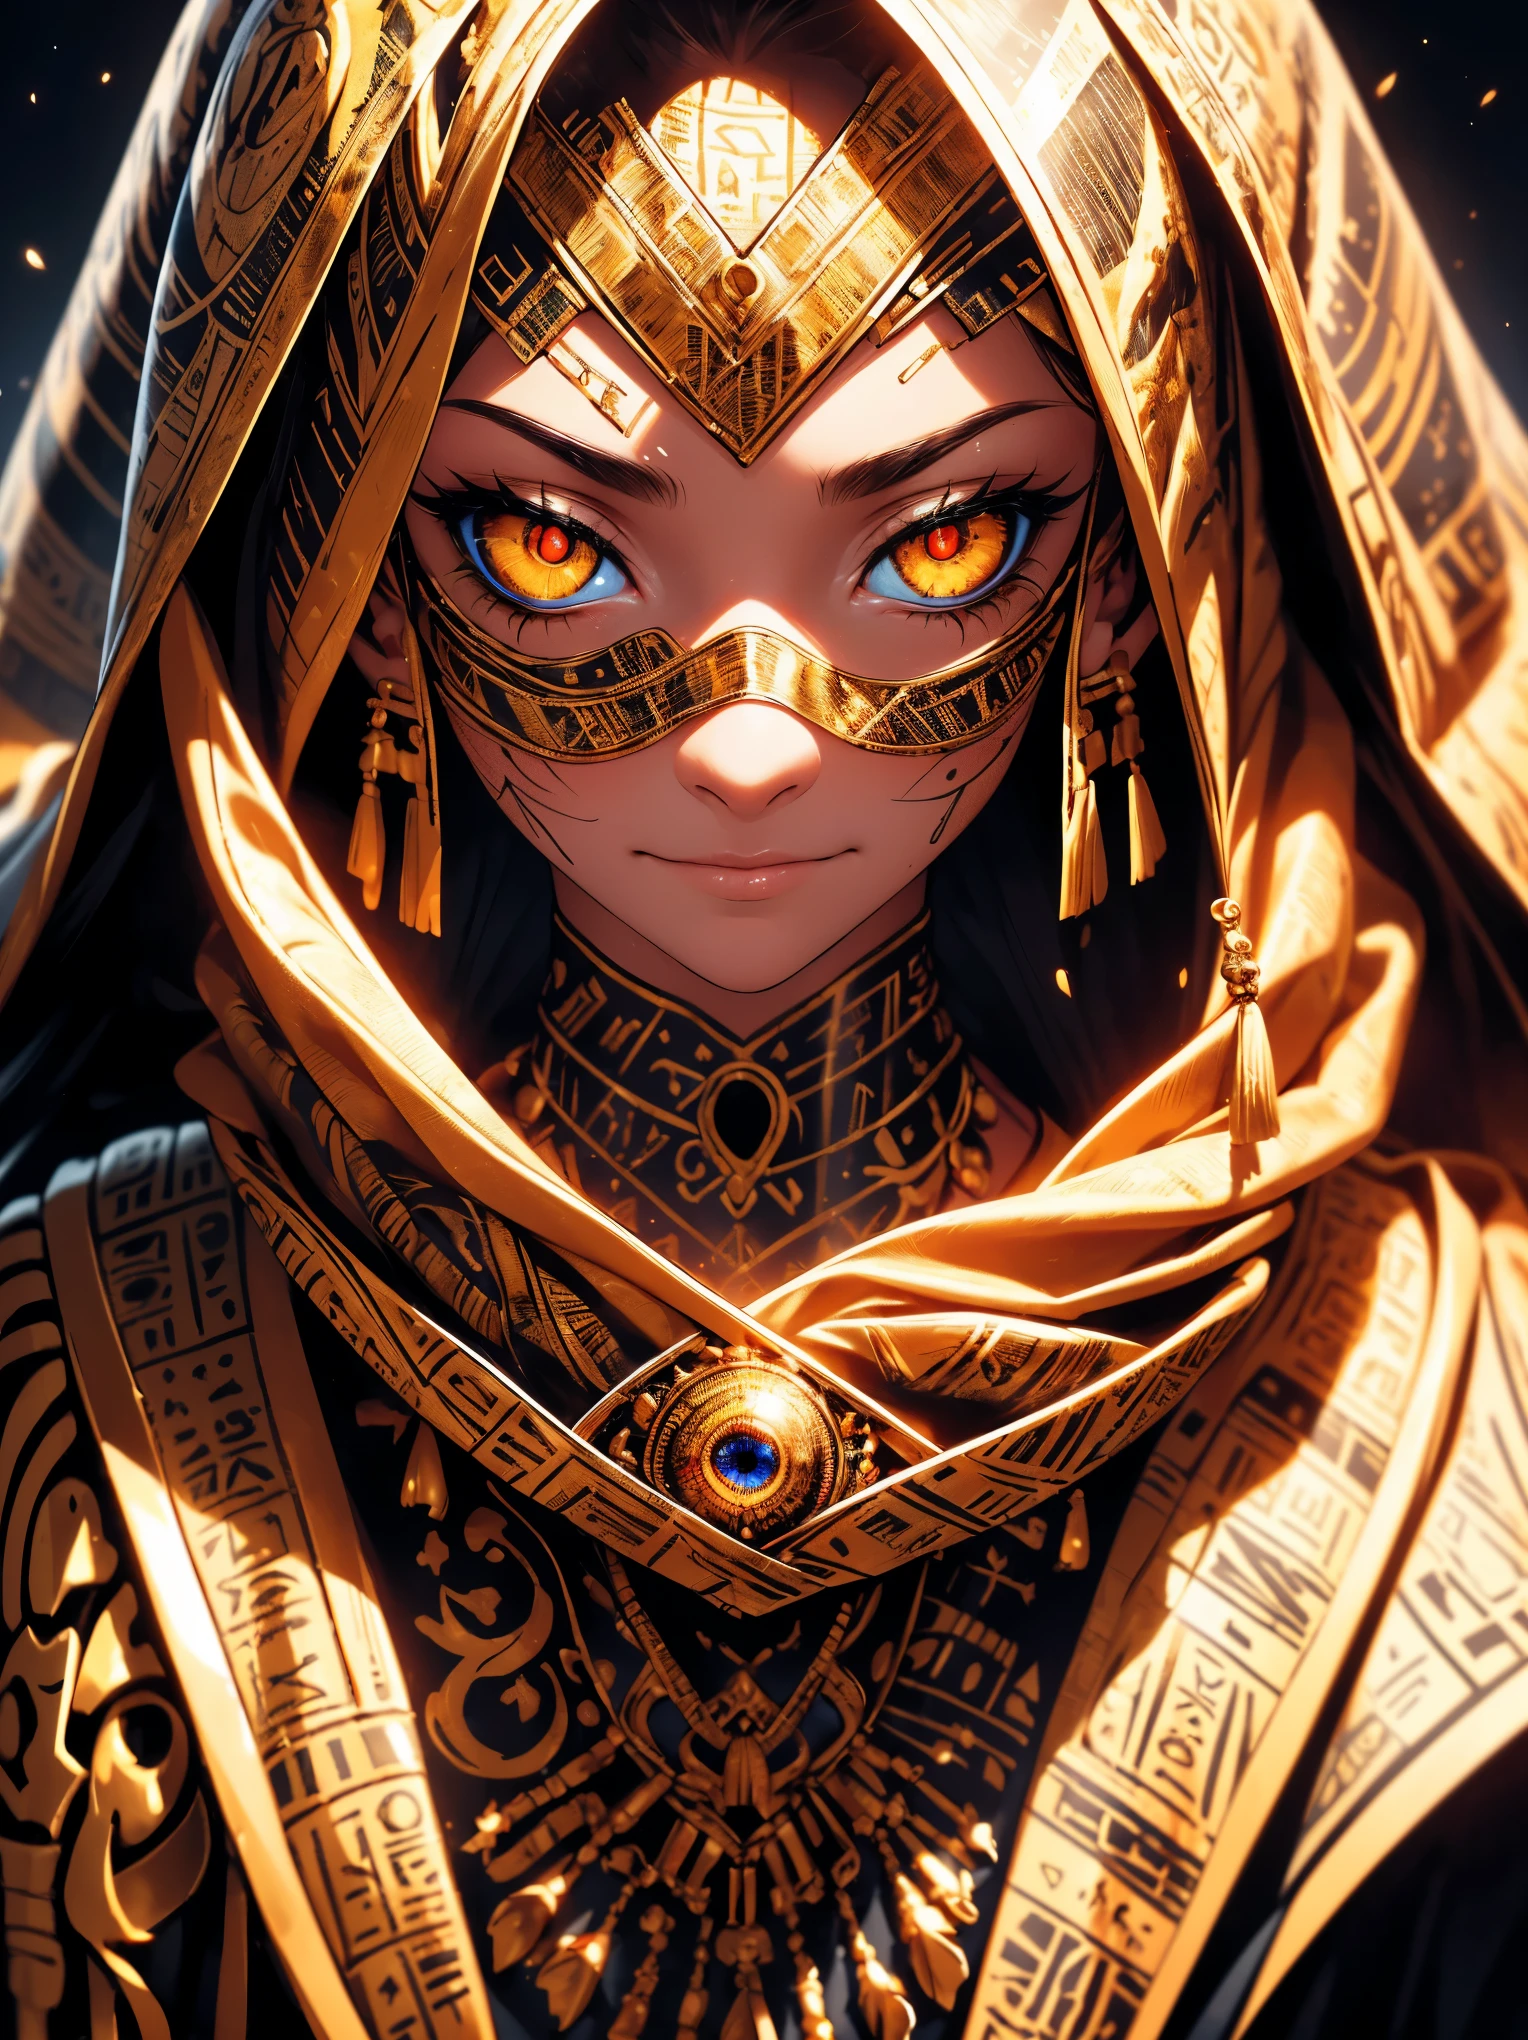 "(best quality,highres),close-up of a mummy's face,covered in bandages with golden hieroglyphics,(detailed:1.1),(vivid and intense colors:1.1),(realistic:1.1) graphic art style,terrifying,eye sockets with glowing golden eyes,detailed wrinkles, dark circles under the eyes"